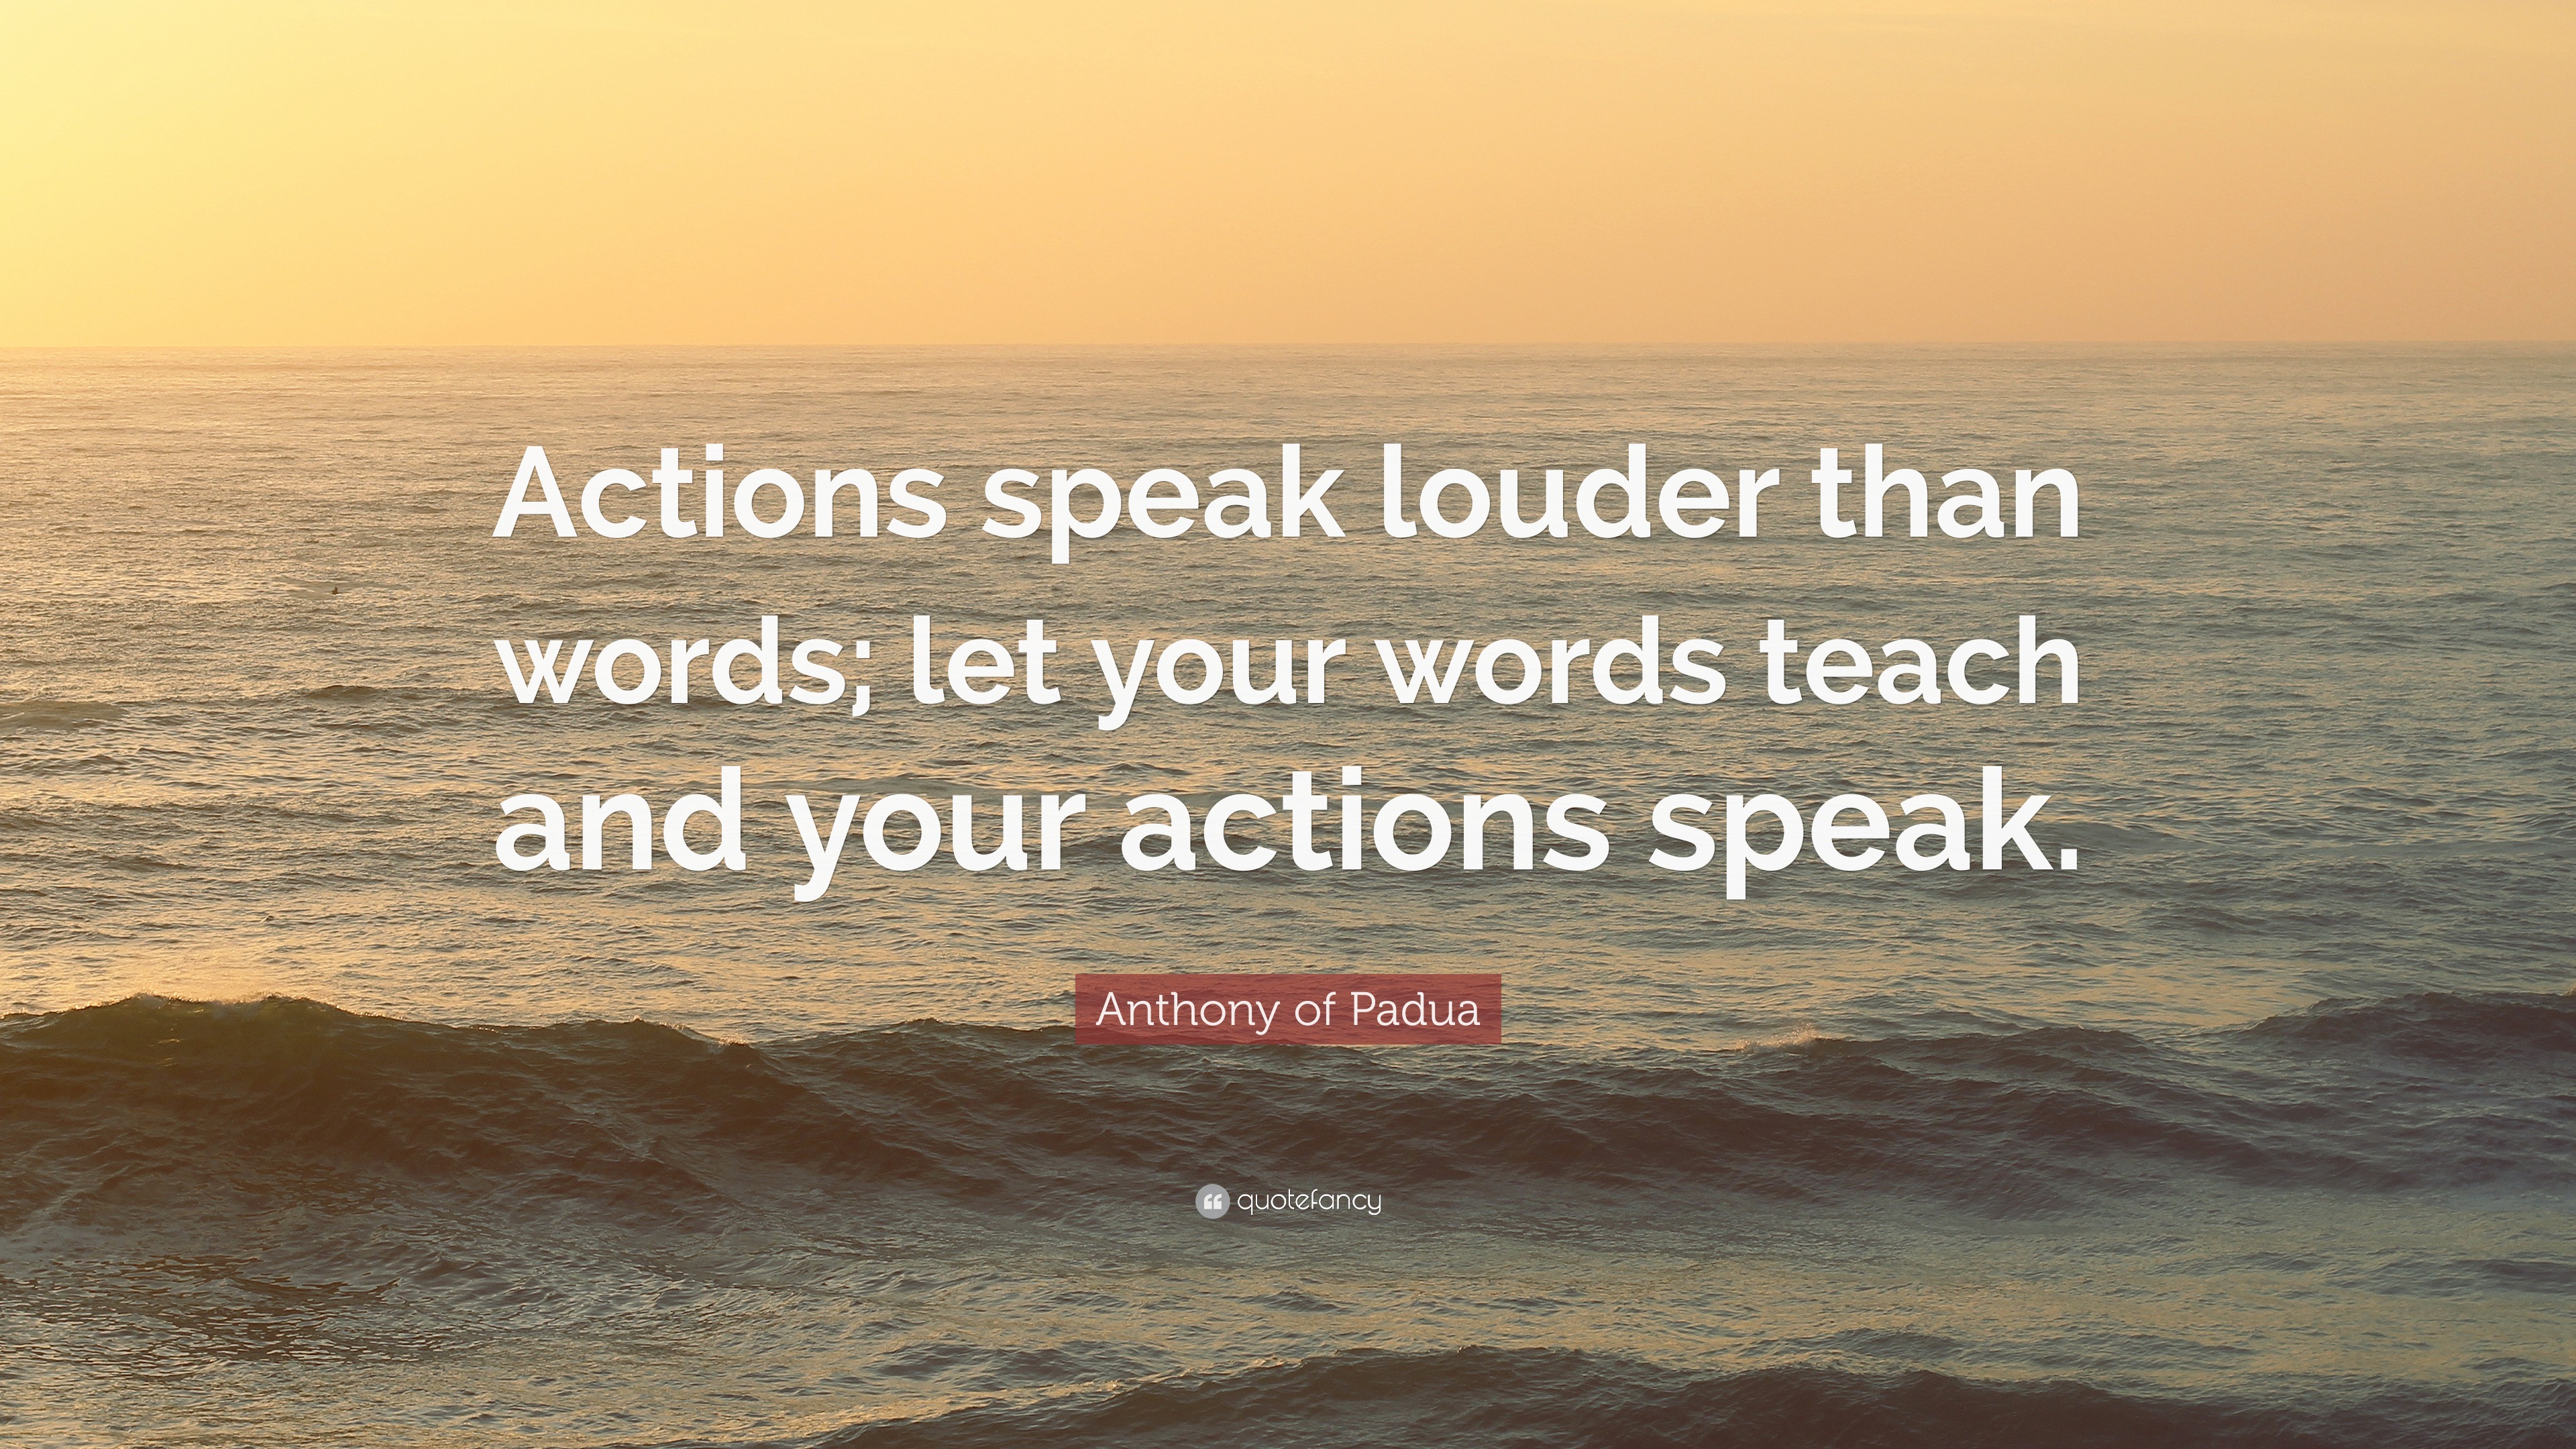 Anthony of Padua Quote “Actions speak louder than words